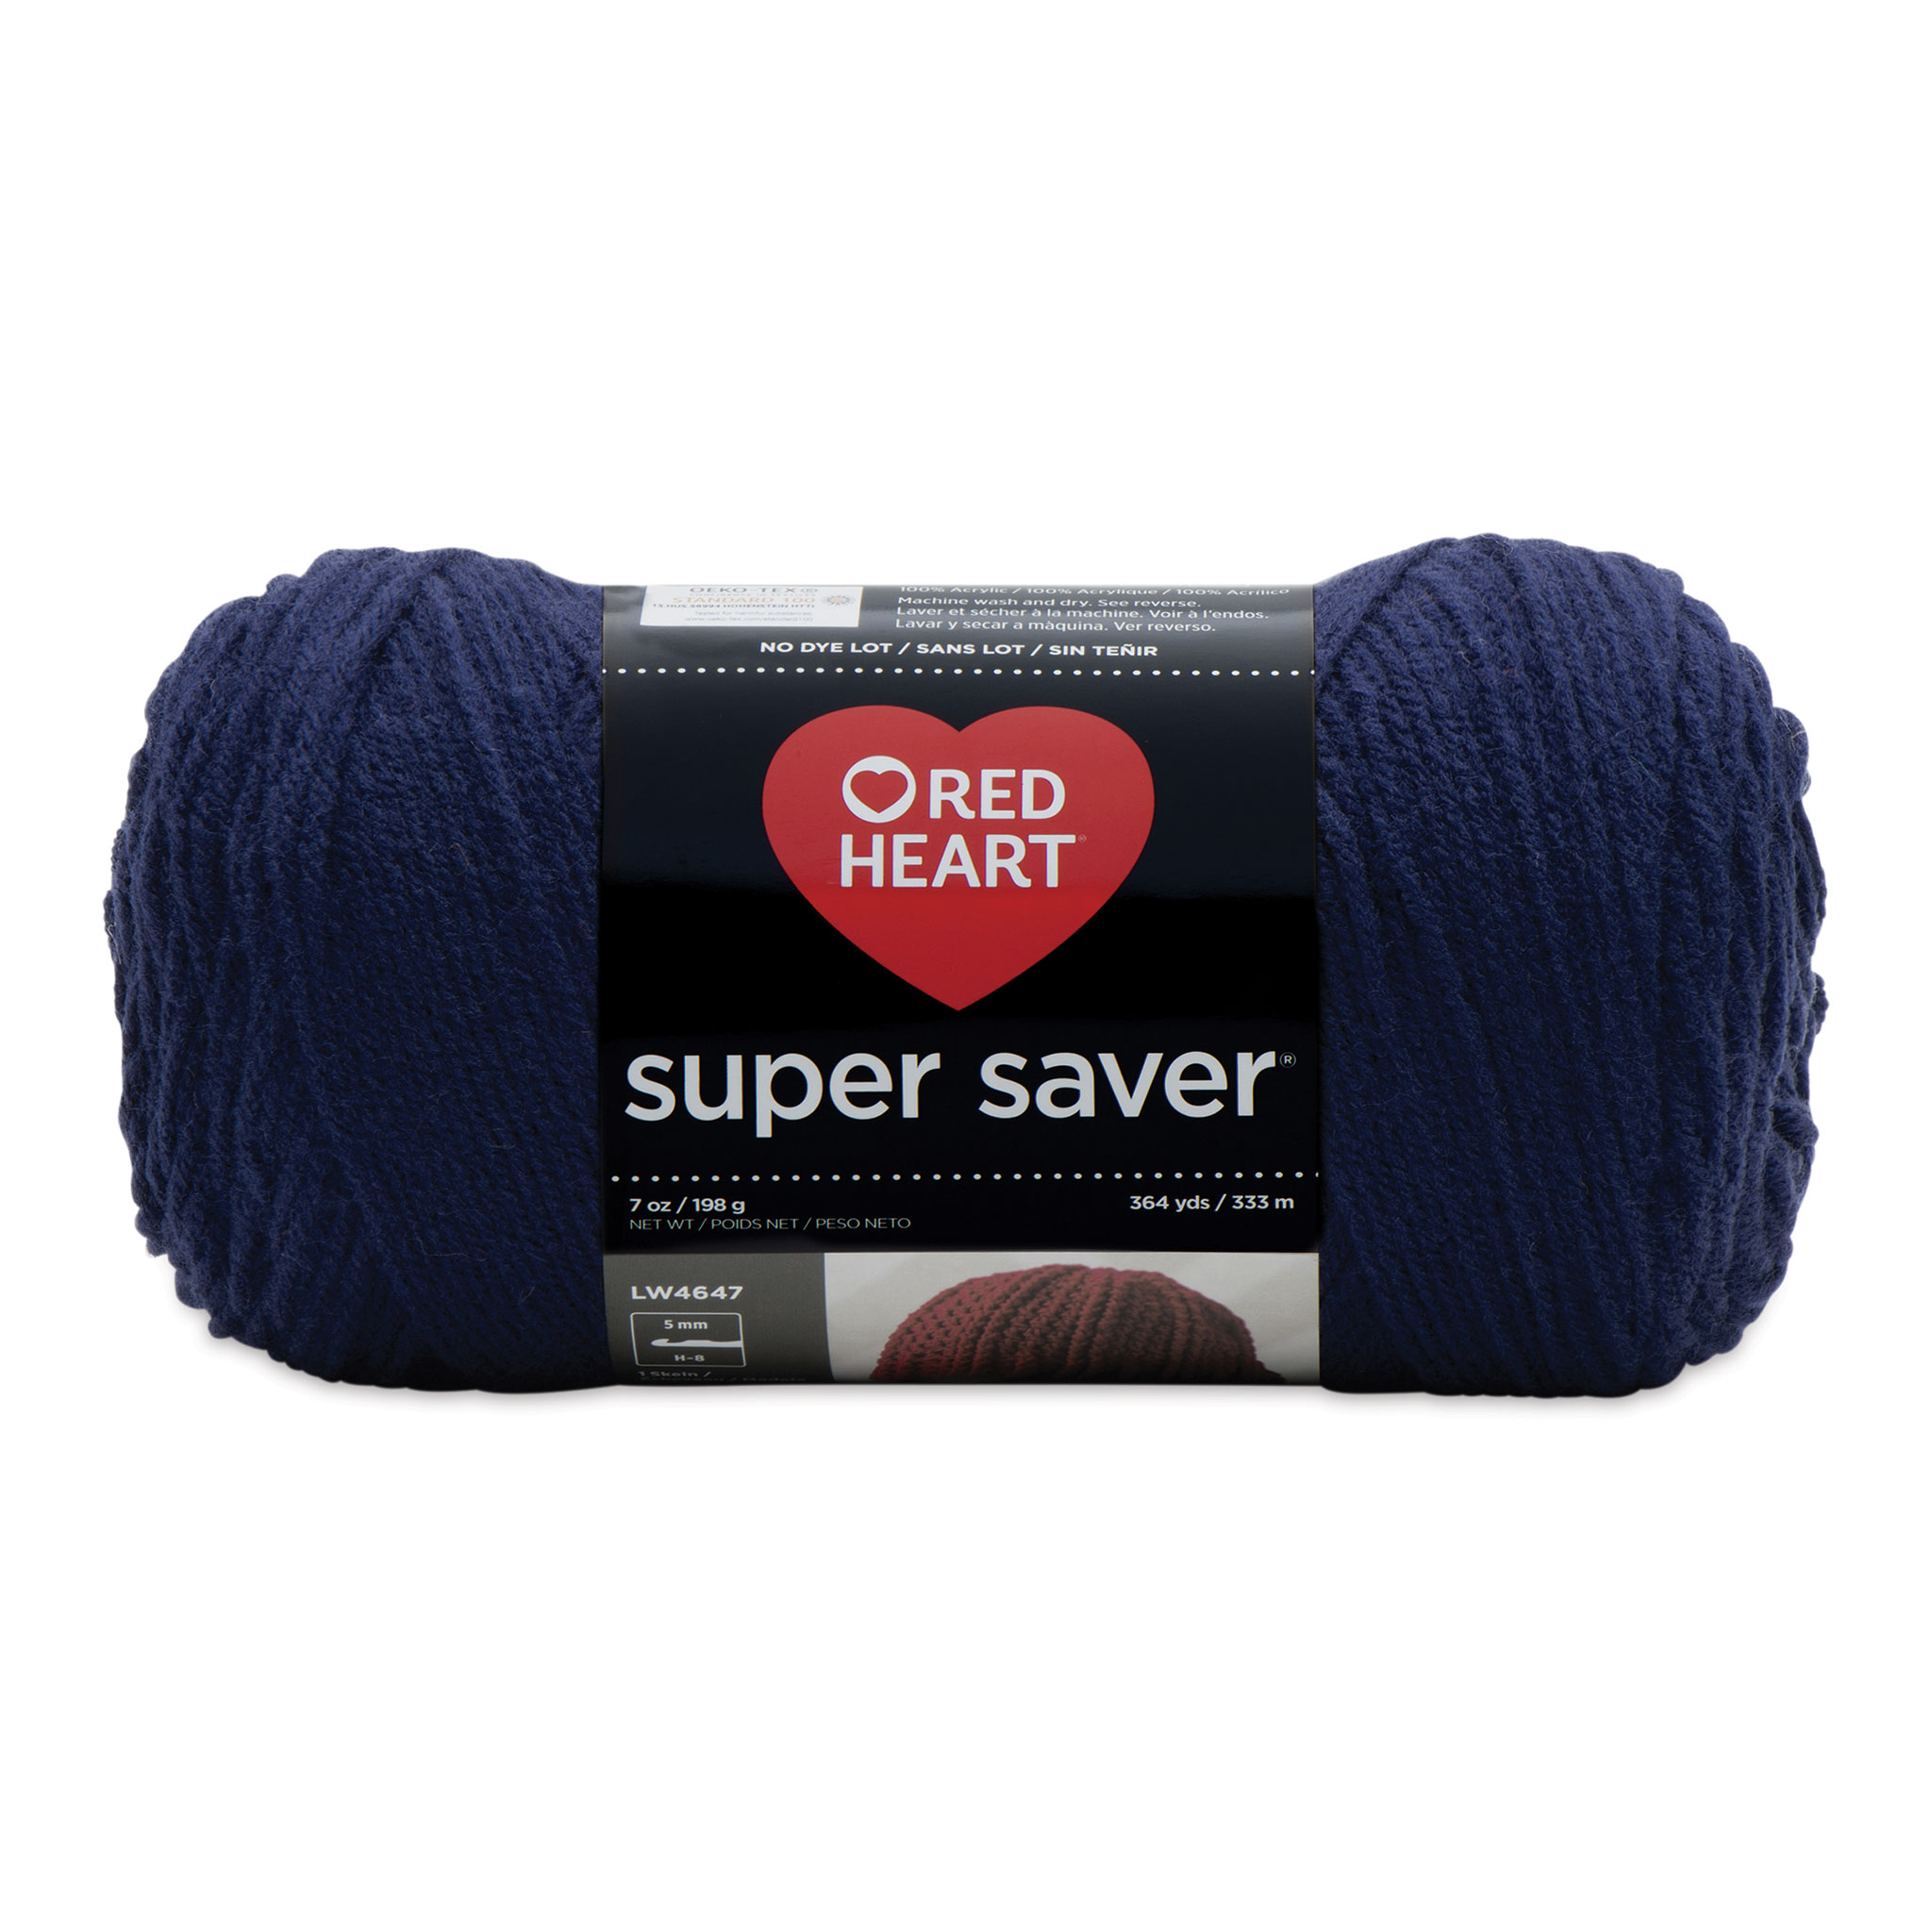 Red Heart Super Saver Yarn-Coral, 1 count - City Market